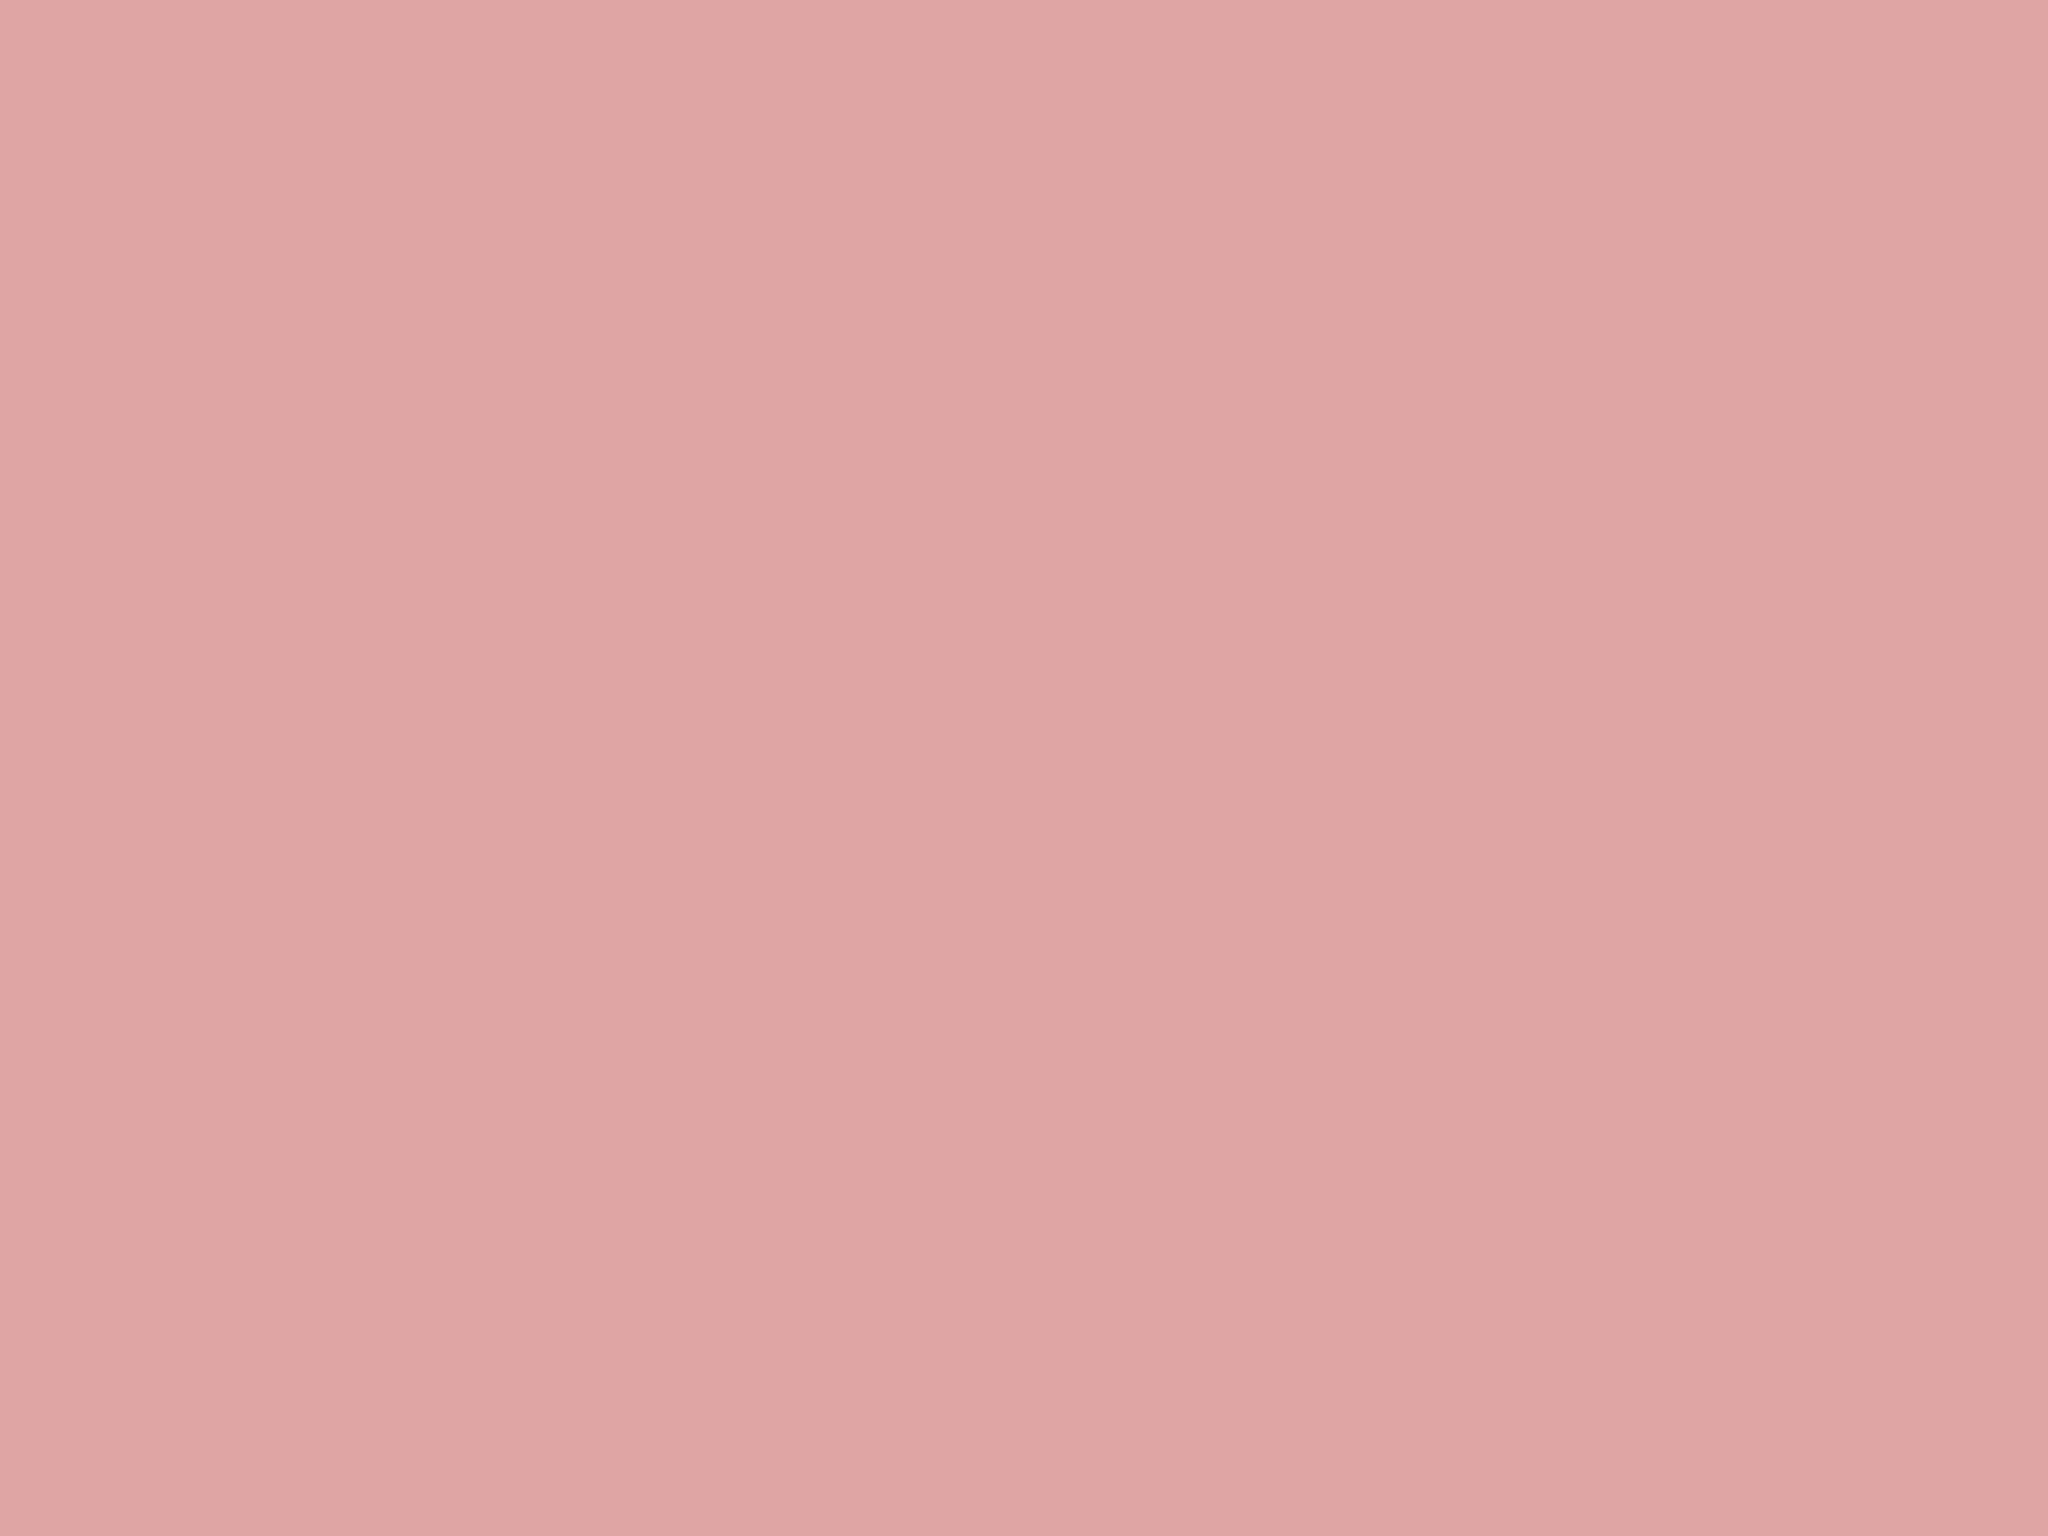 2048x1536 Pastel Pink Solid Color Background